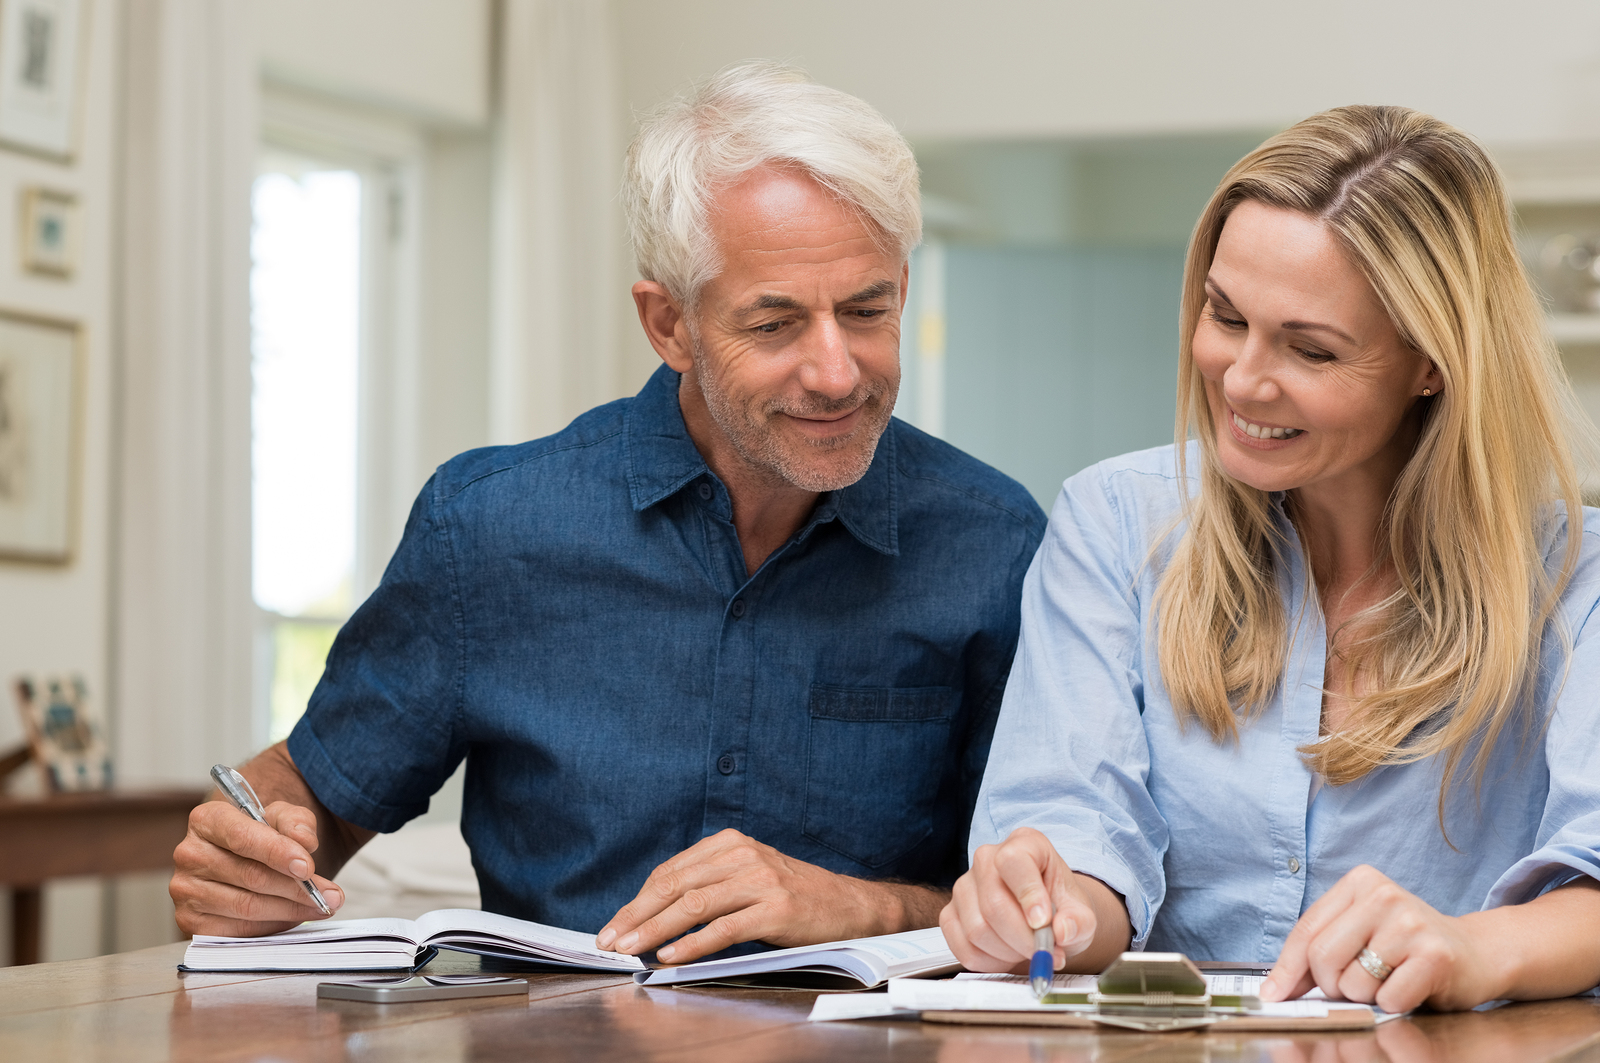 SHOULD YOU AND YOUR SPOUSE RETIRE TOGETHER?